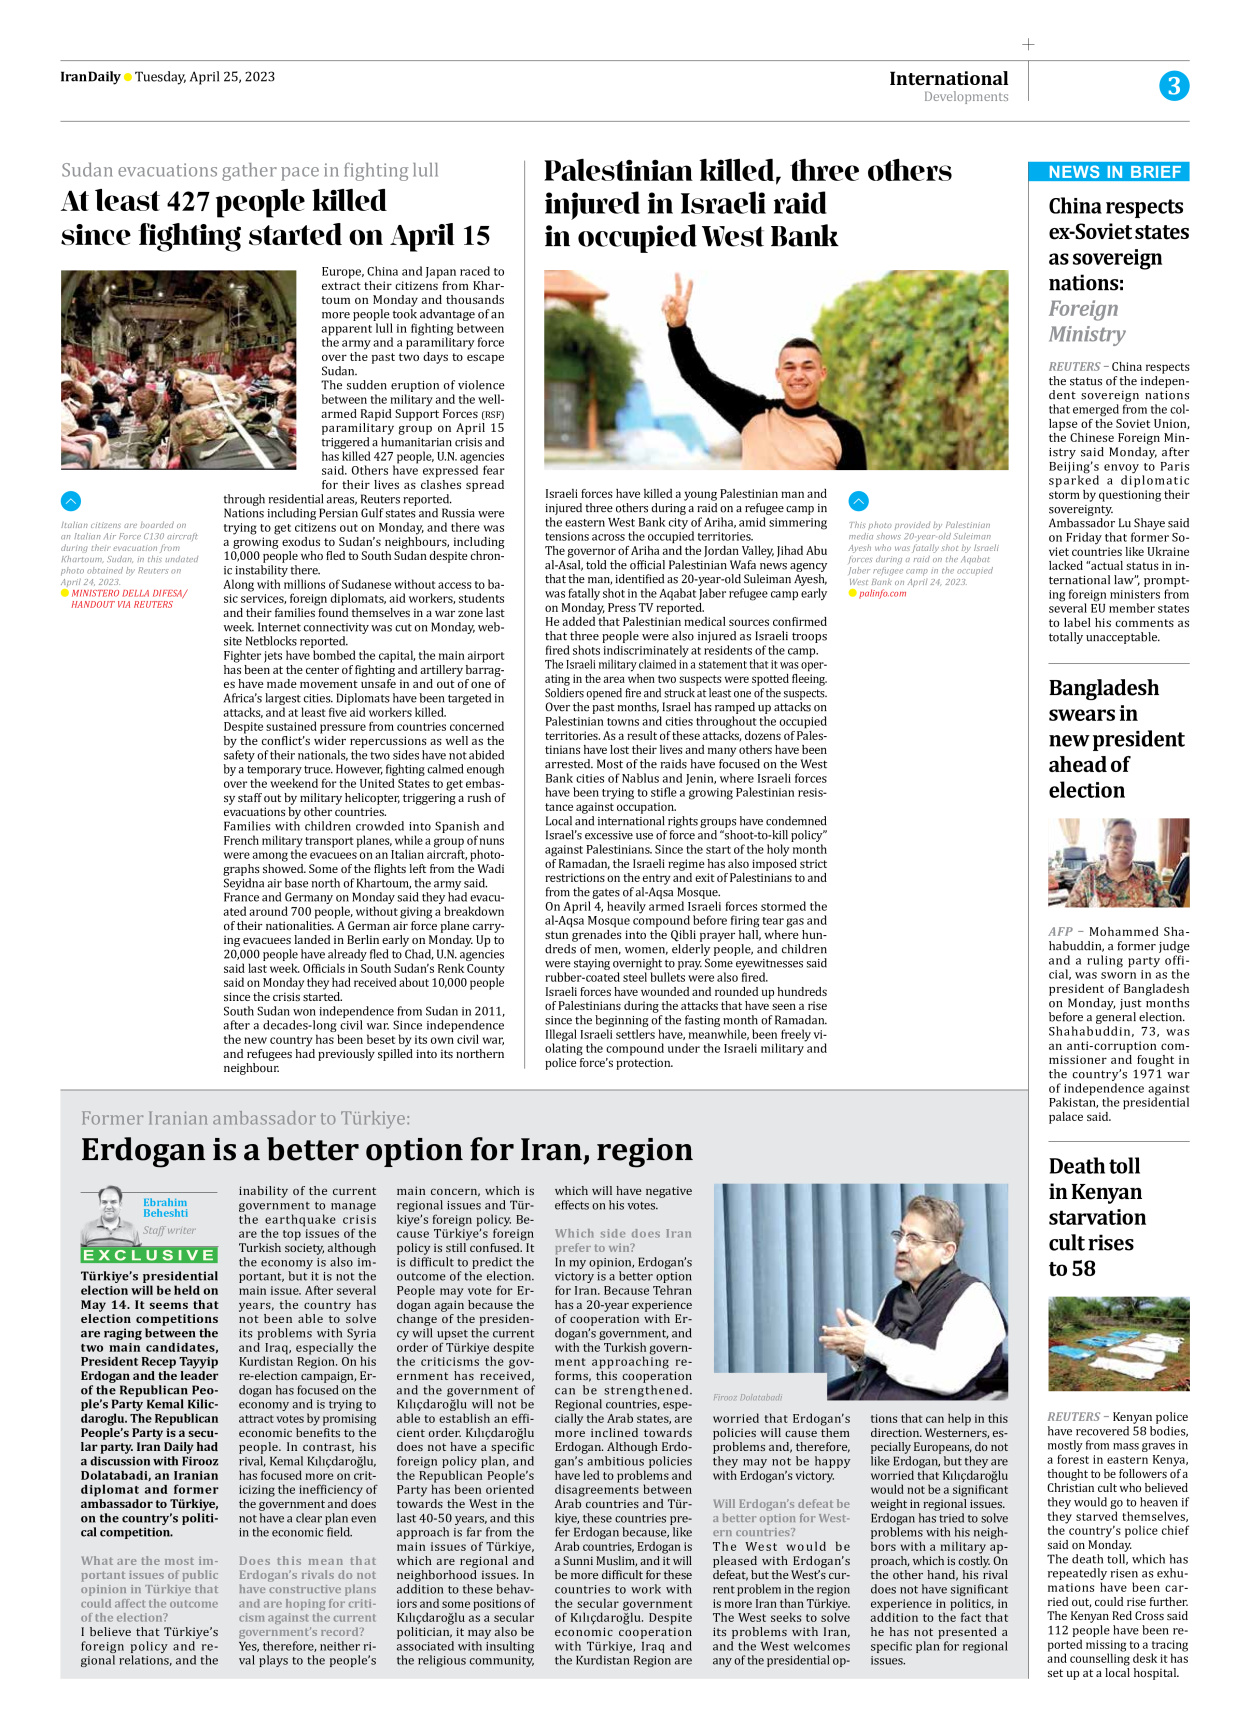 Iran Daily - Number Seven Thousand Two Hundred and Seventy Five - 25 April 2023 - Page 3